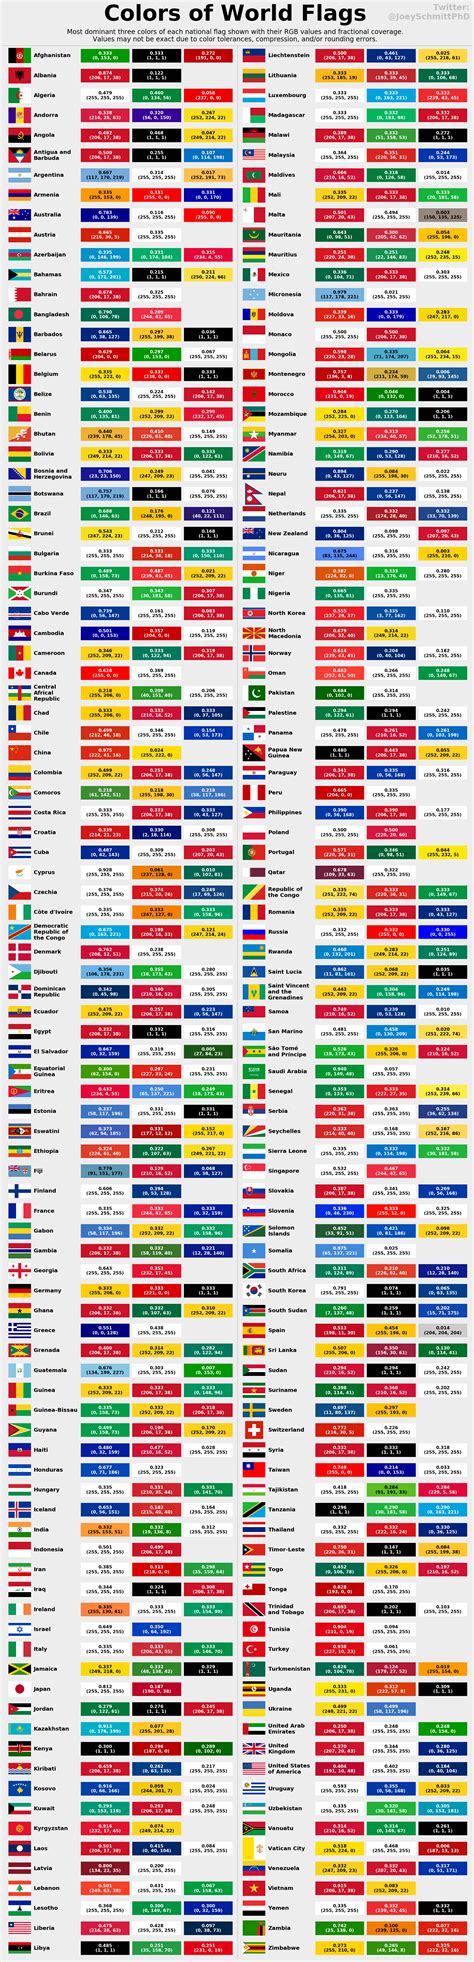 List Of Flags By Color Combination Wikipedia American Flag Color By Number - American Flag Color By Number